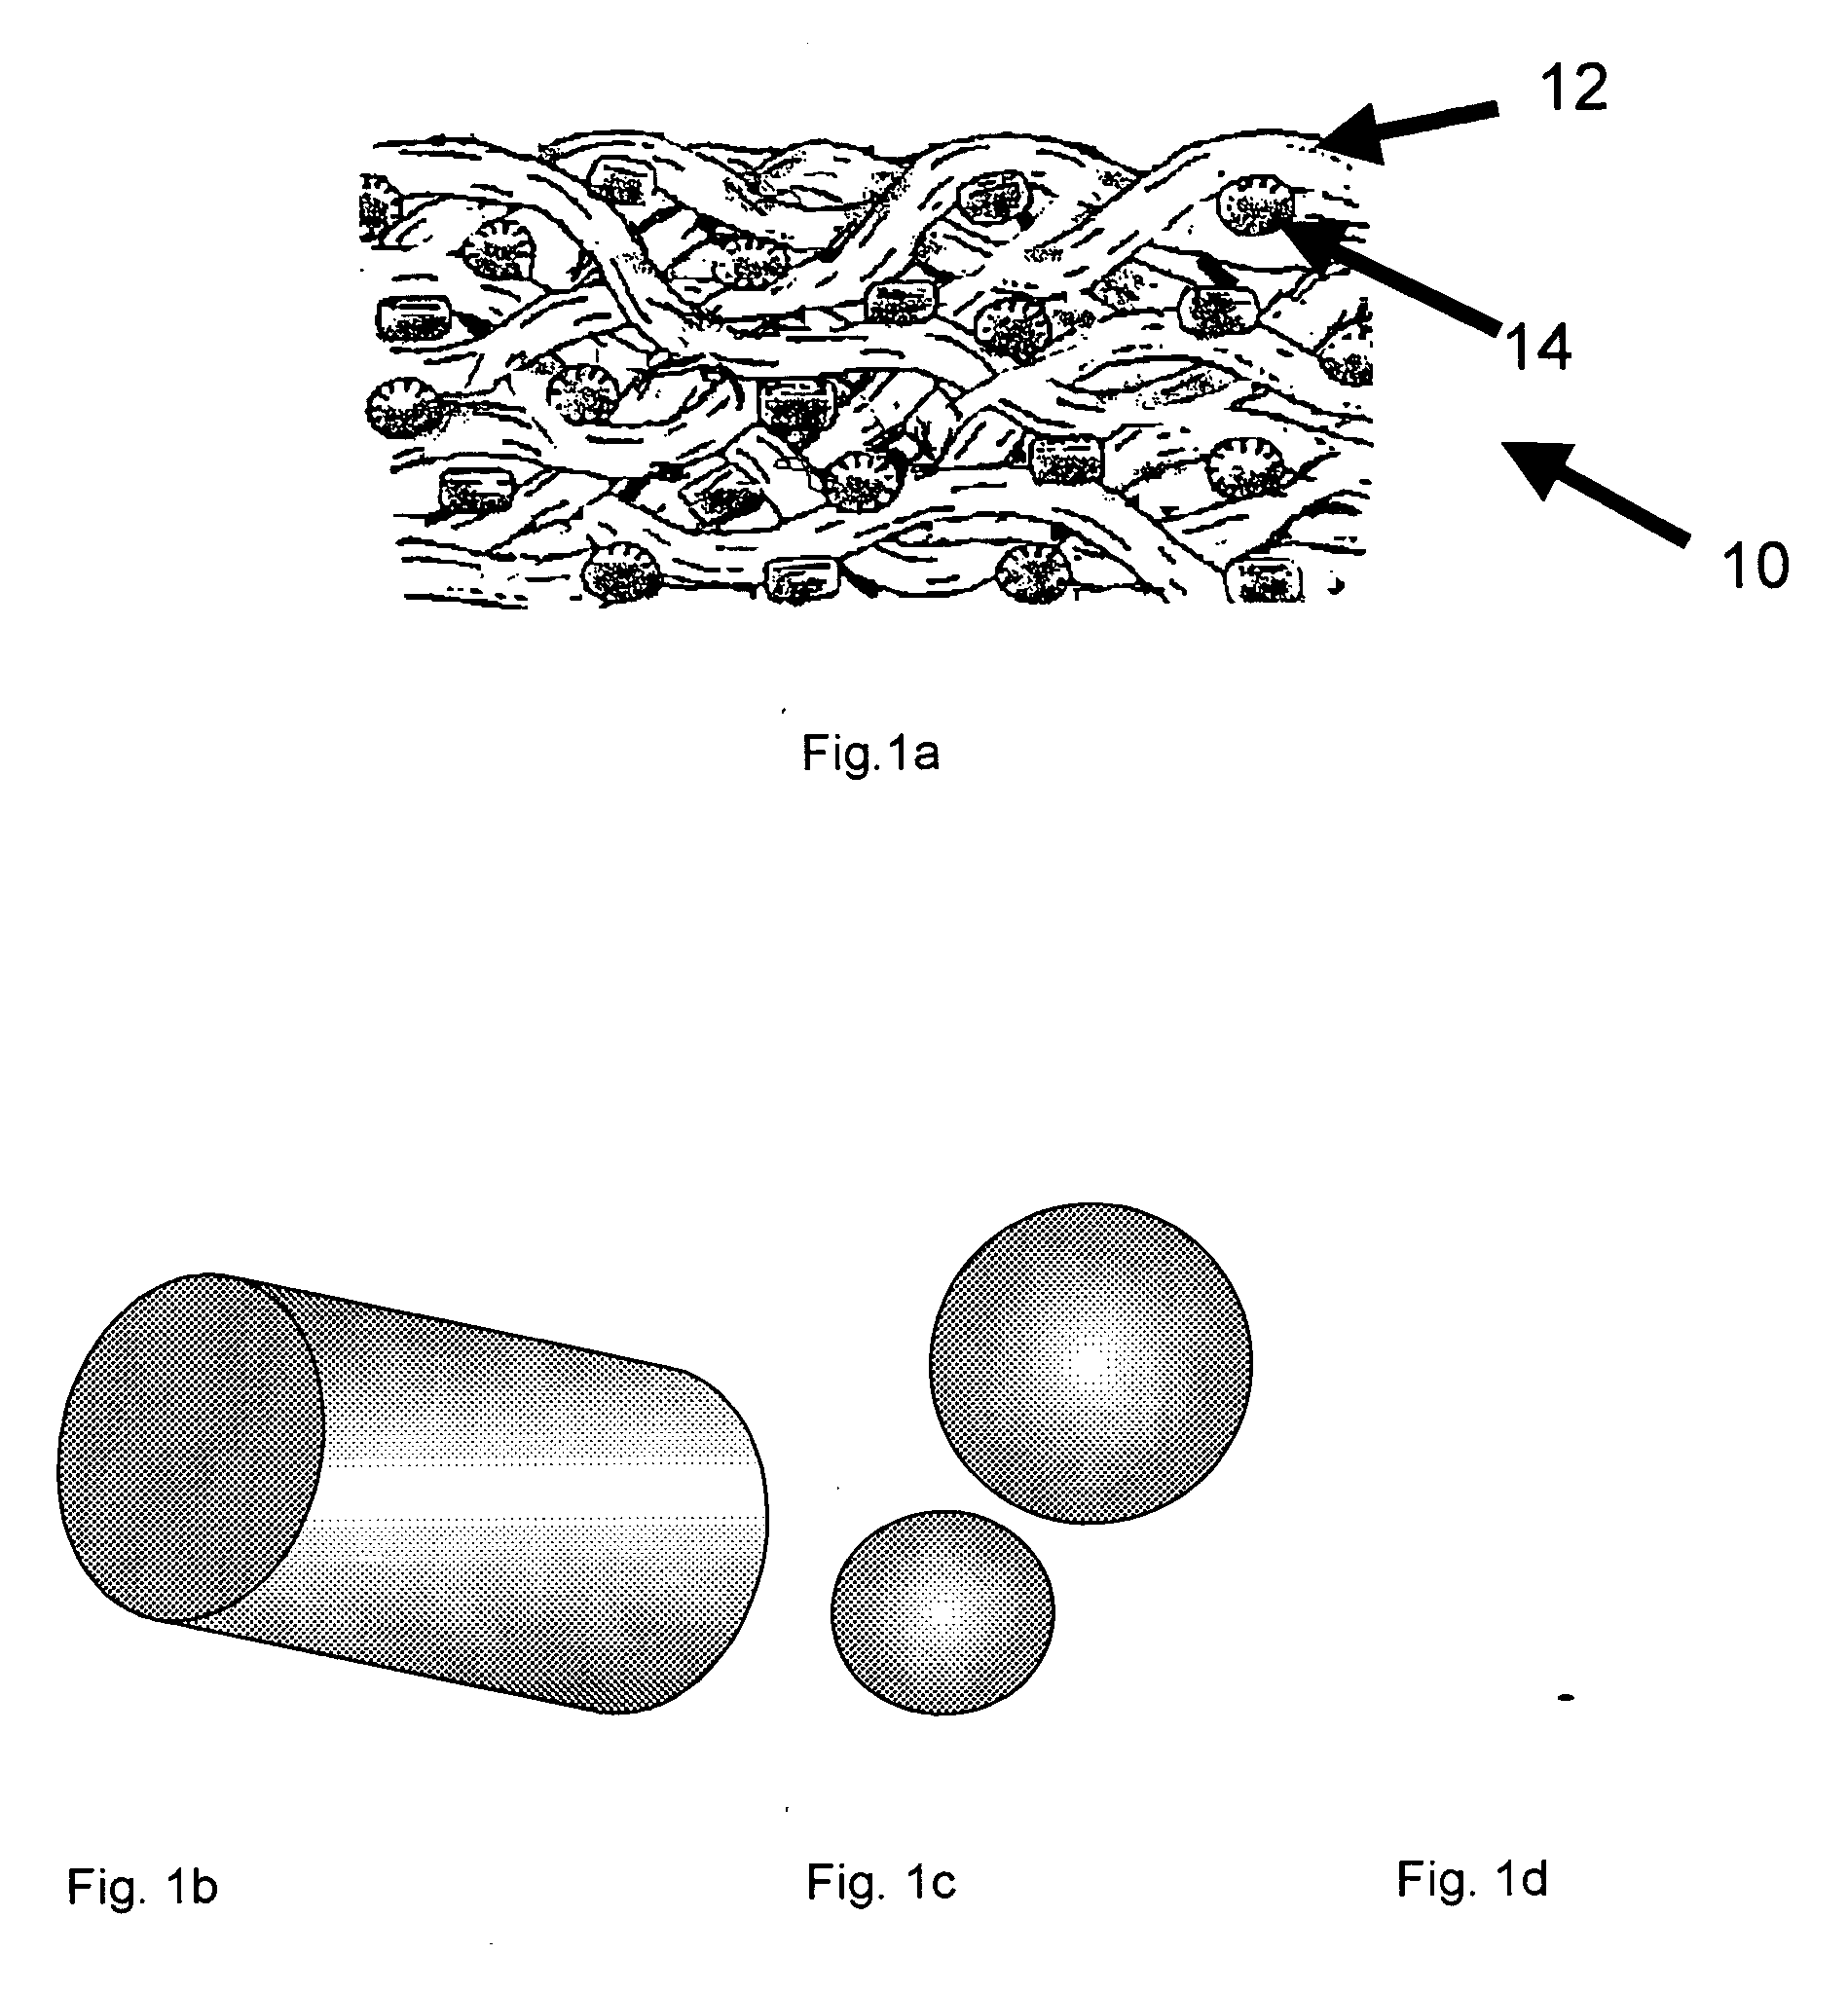 Porous friction material with nanoparticles of friction modifying material